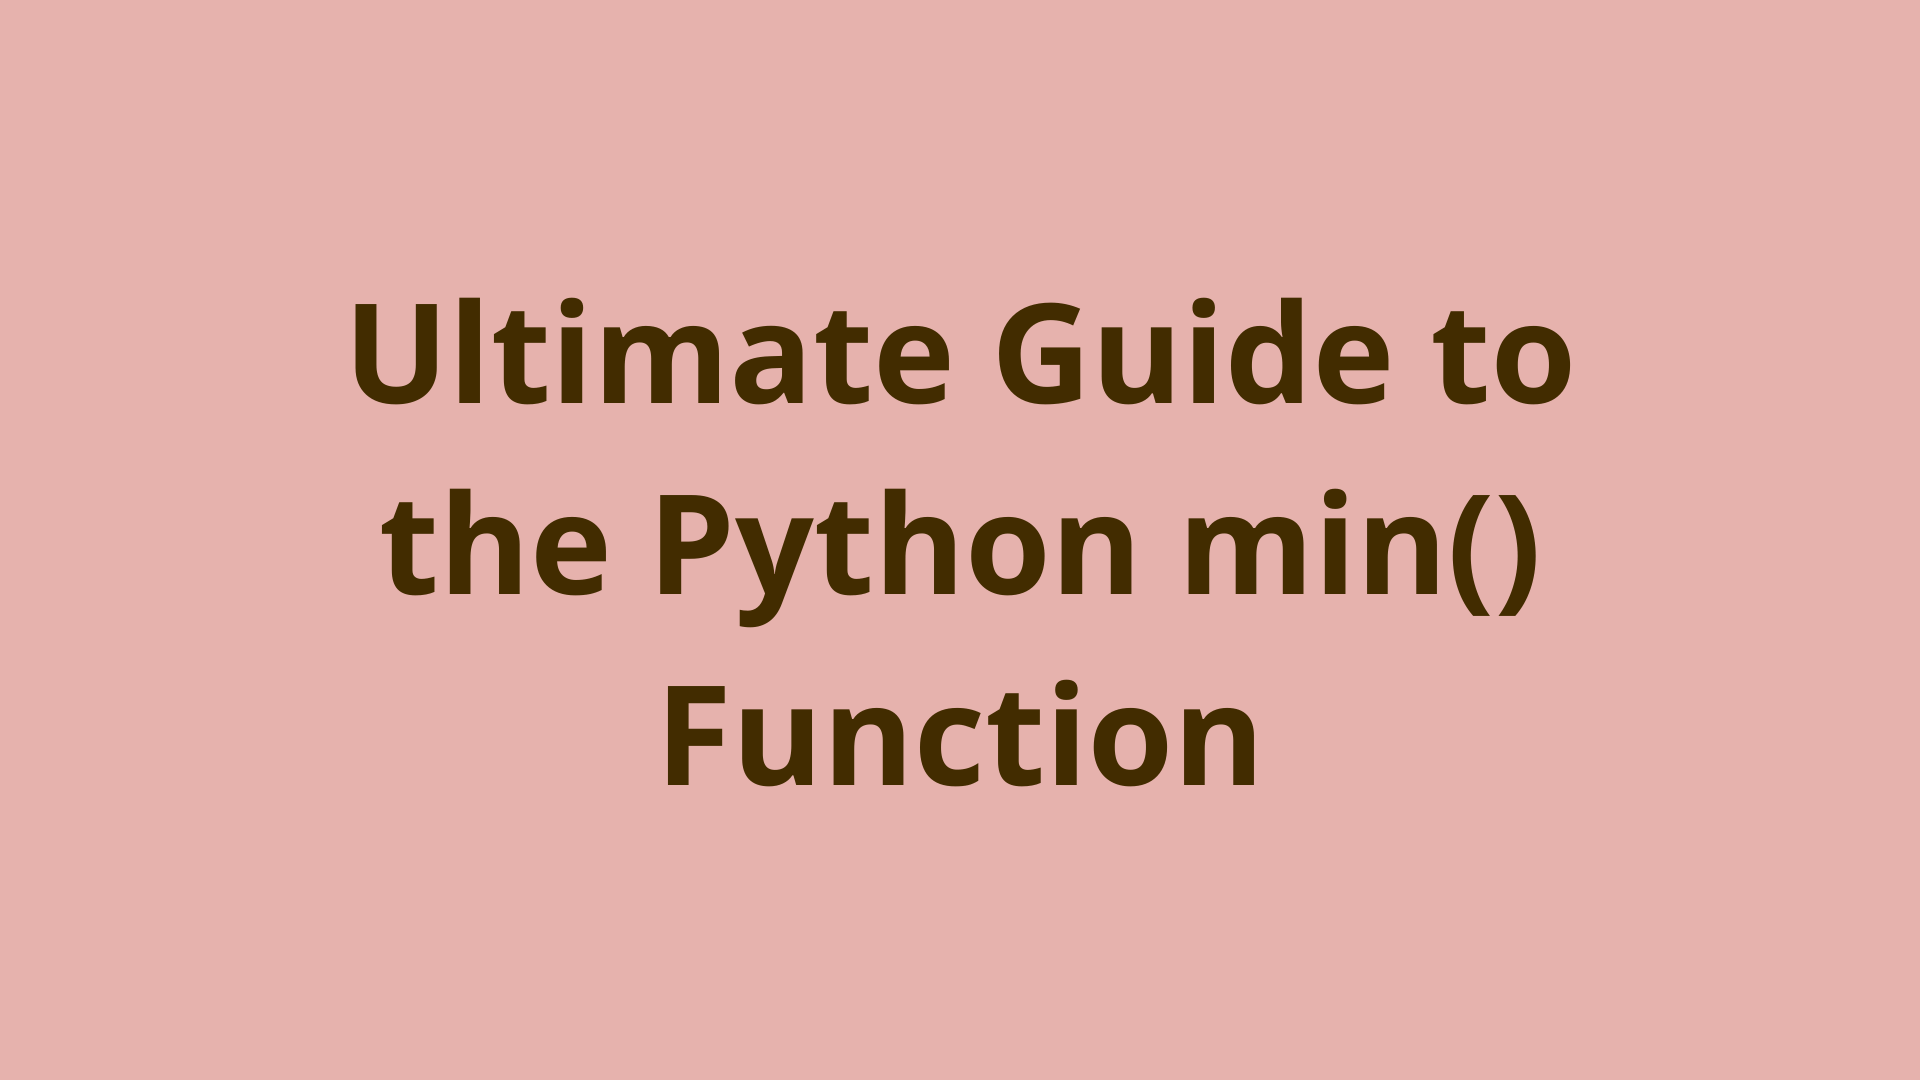 Image of Ultimate Guide to the Python min() Function